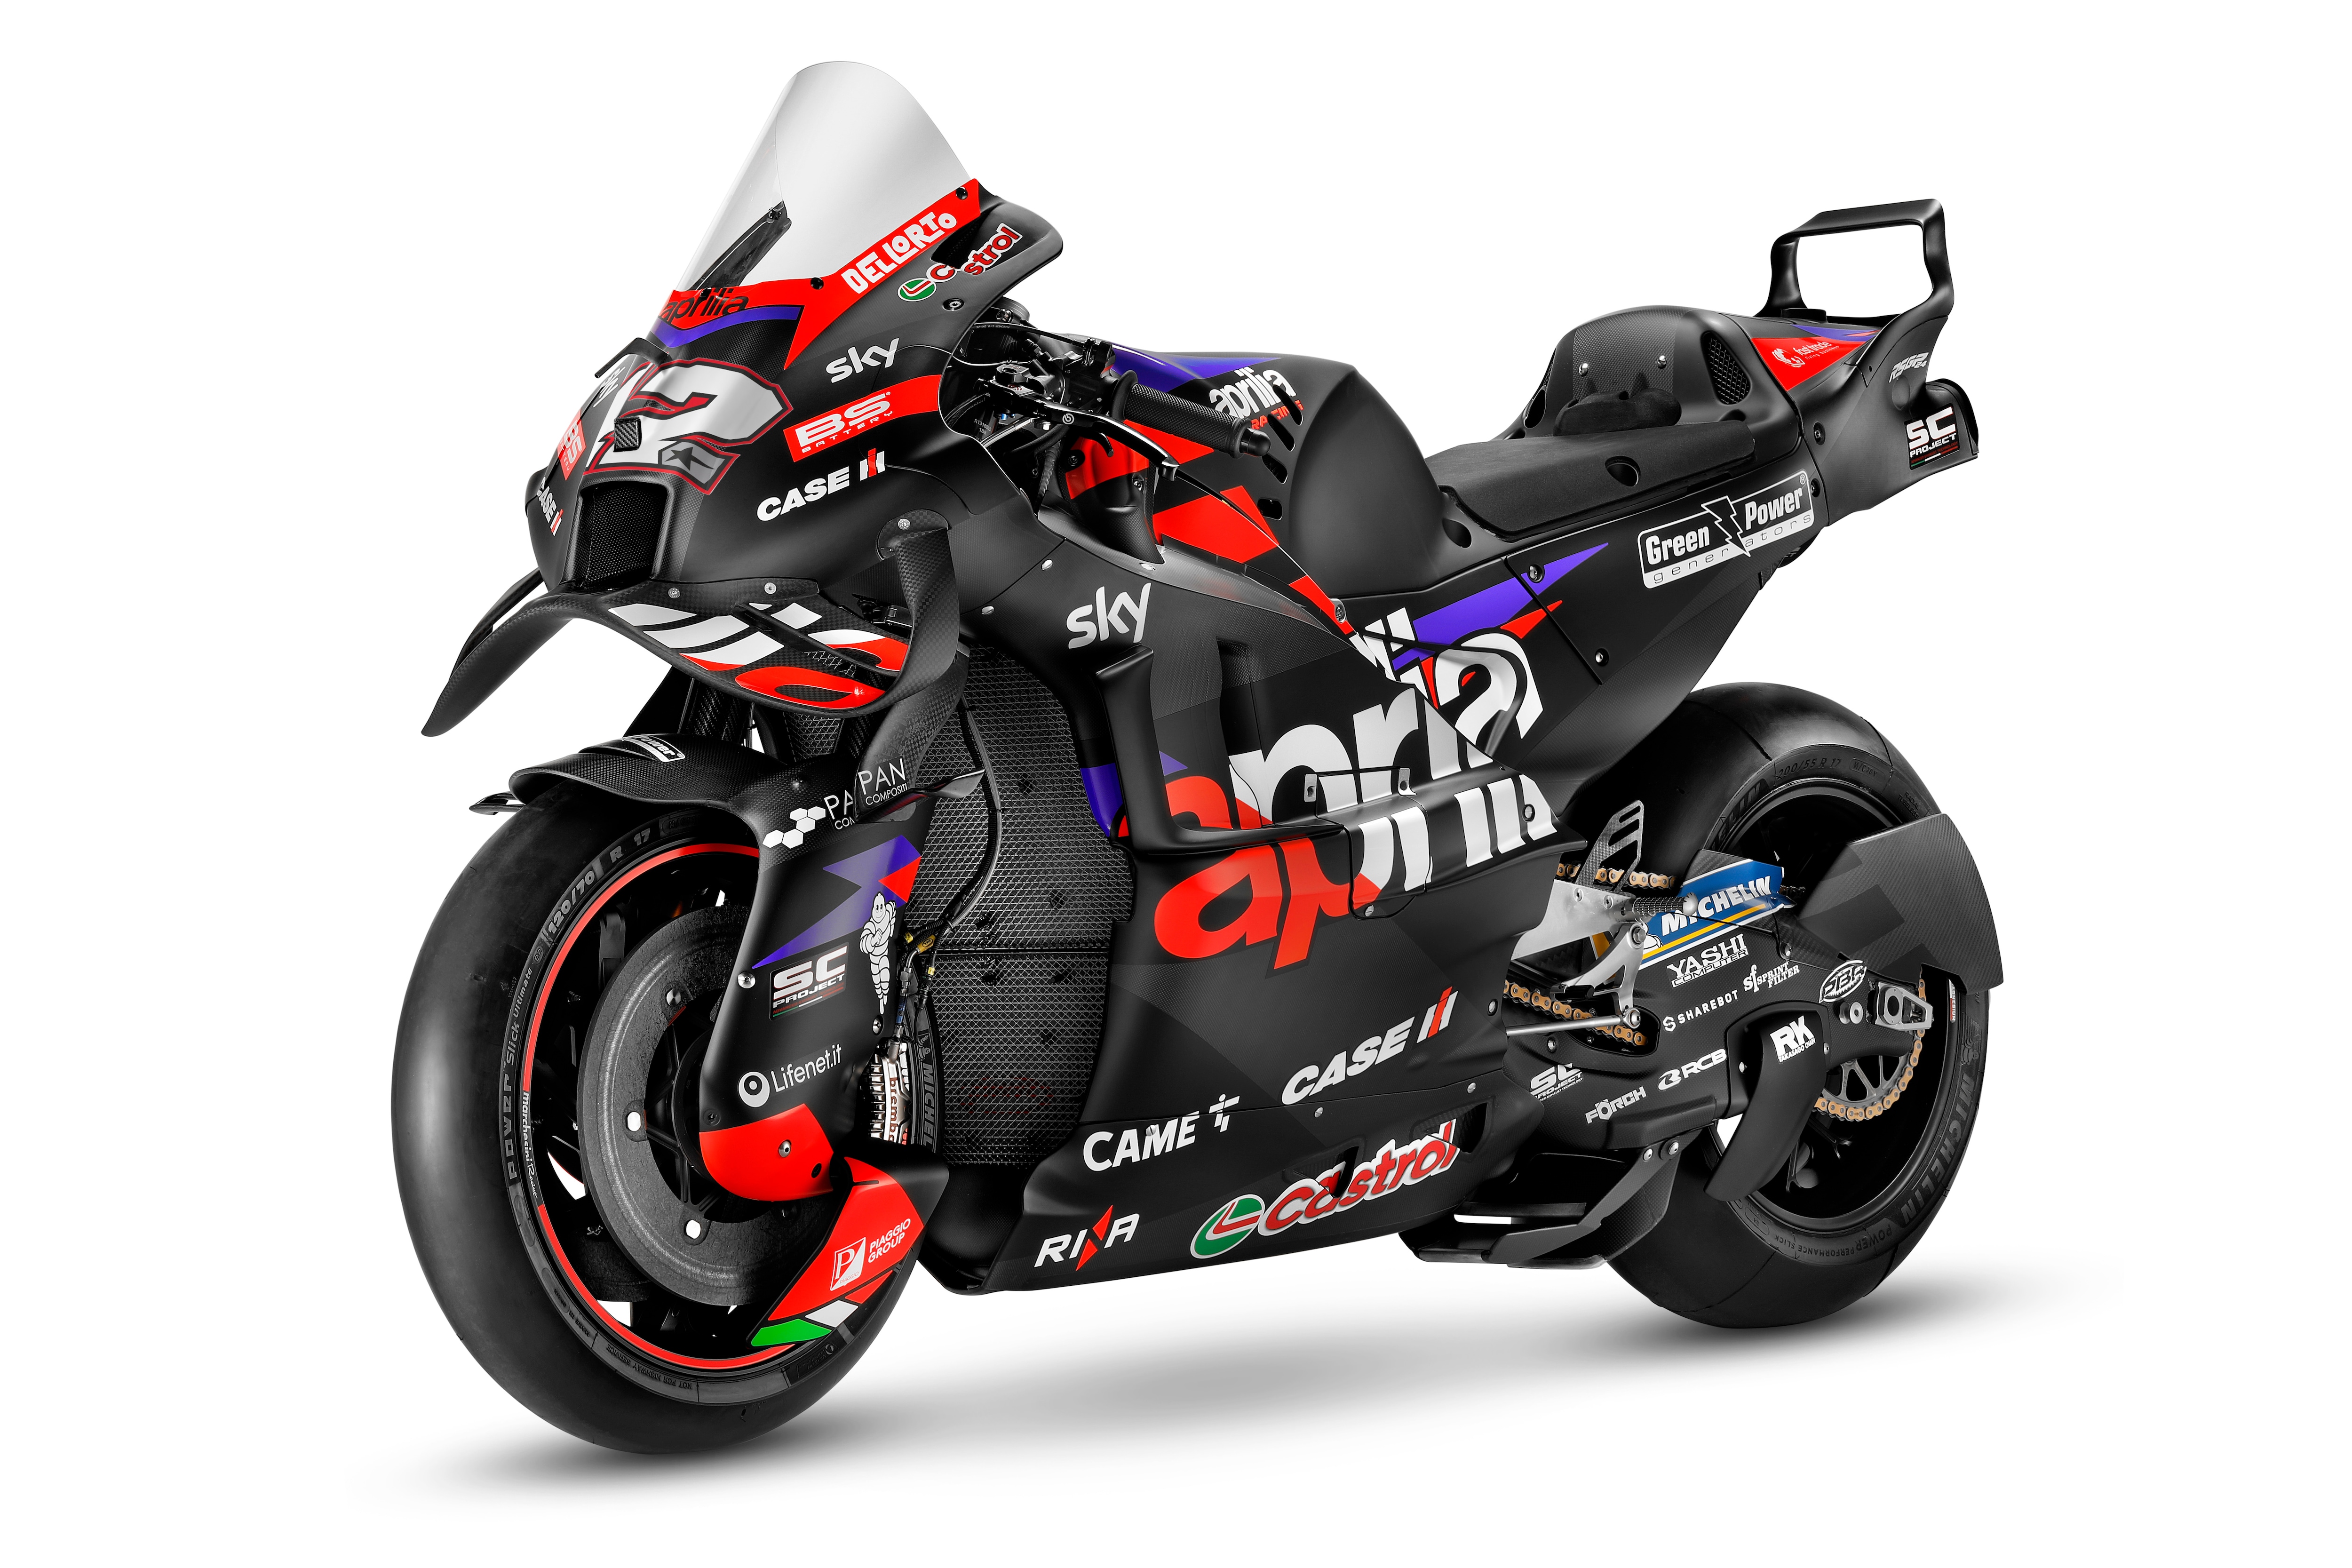 While the 2023 Indian GP was challenging for Aprilia and the team is looking at a more competitive performance this year